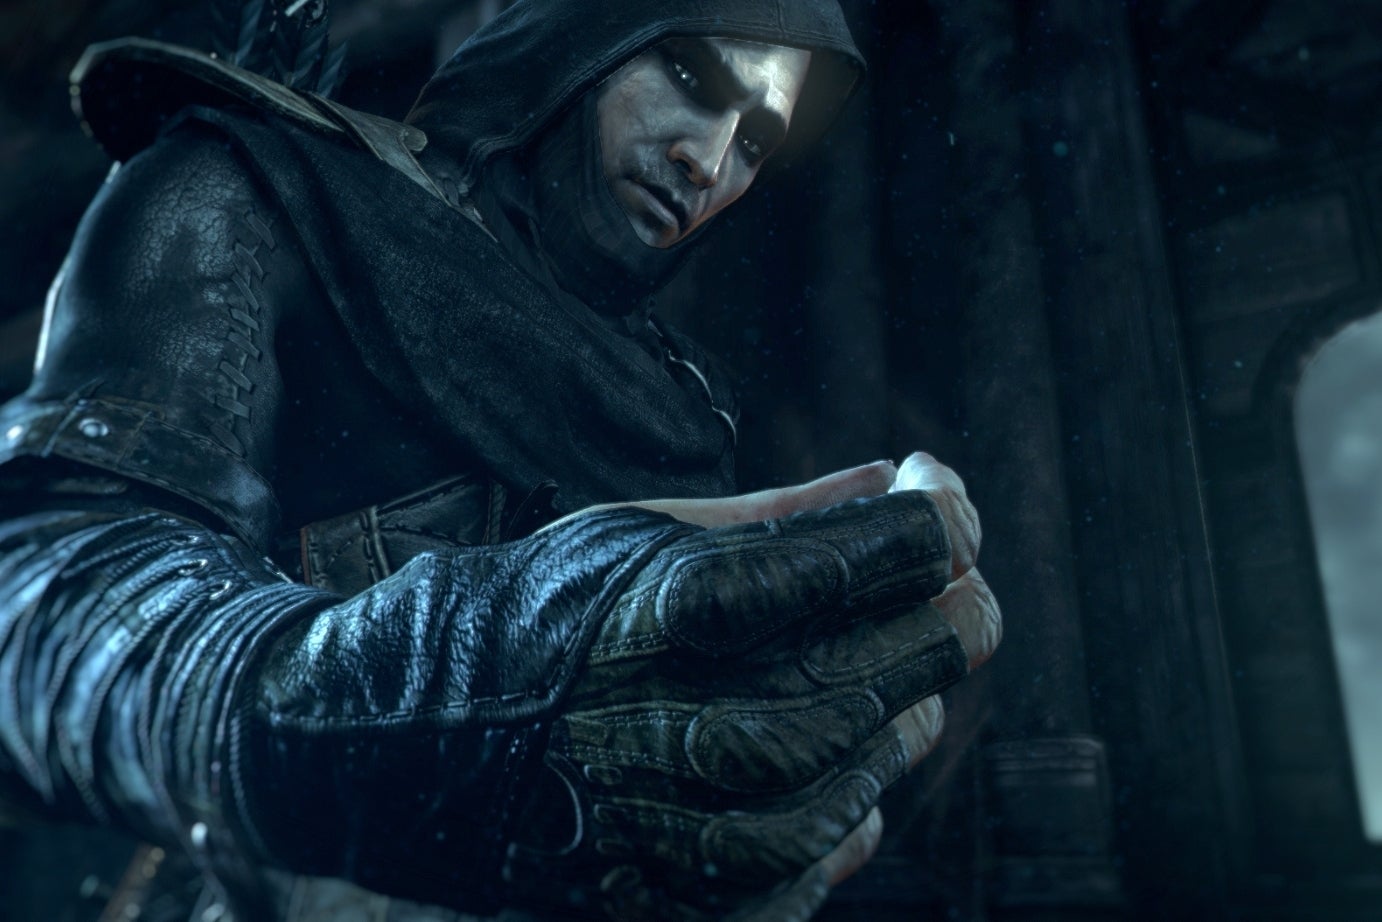 Image for New Thief gameplay trailer shows Garrett doing his thing